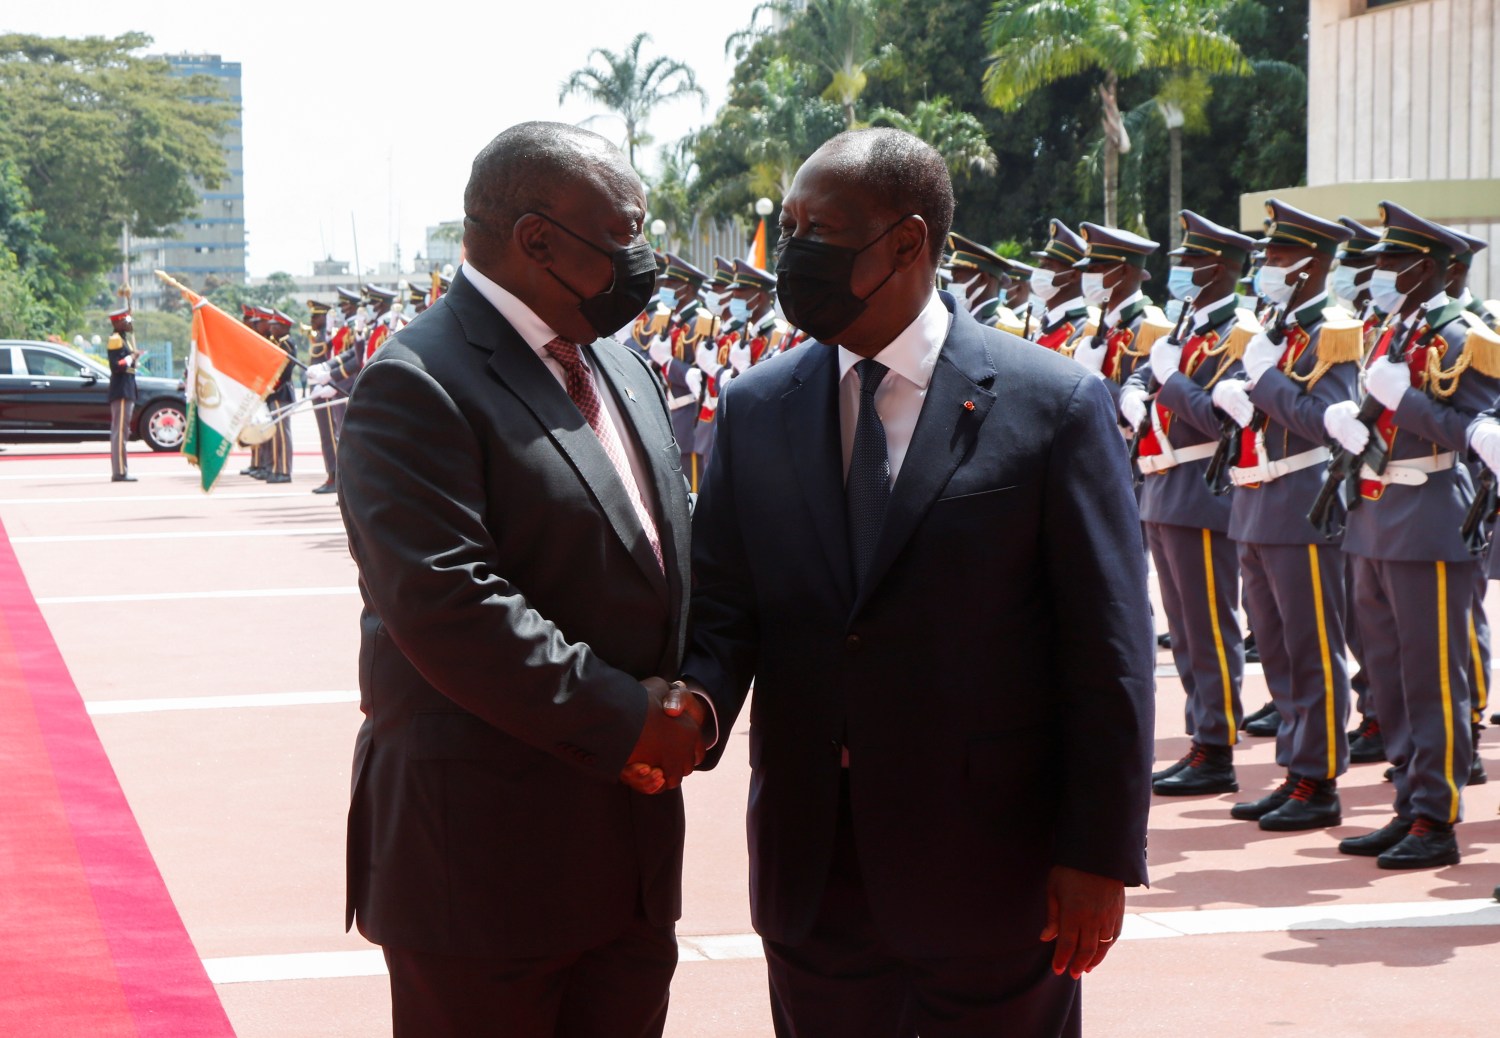 South African President Cyril Ramaphosa shakes hands with Ivory Coast's President Alassane Ouattara at the the presidential palace in Abidjan, Ivory Coast December 2, 2021. REUTERS/Luc Gnago